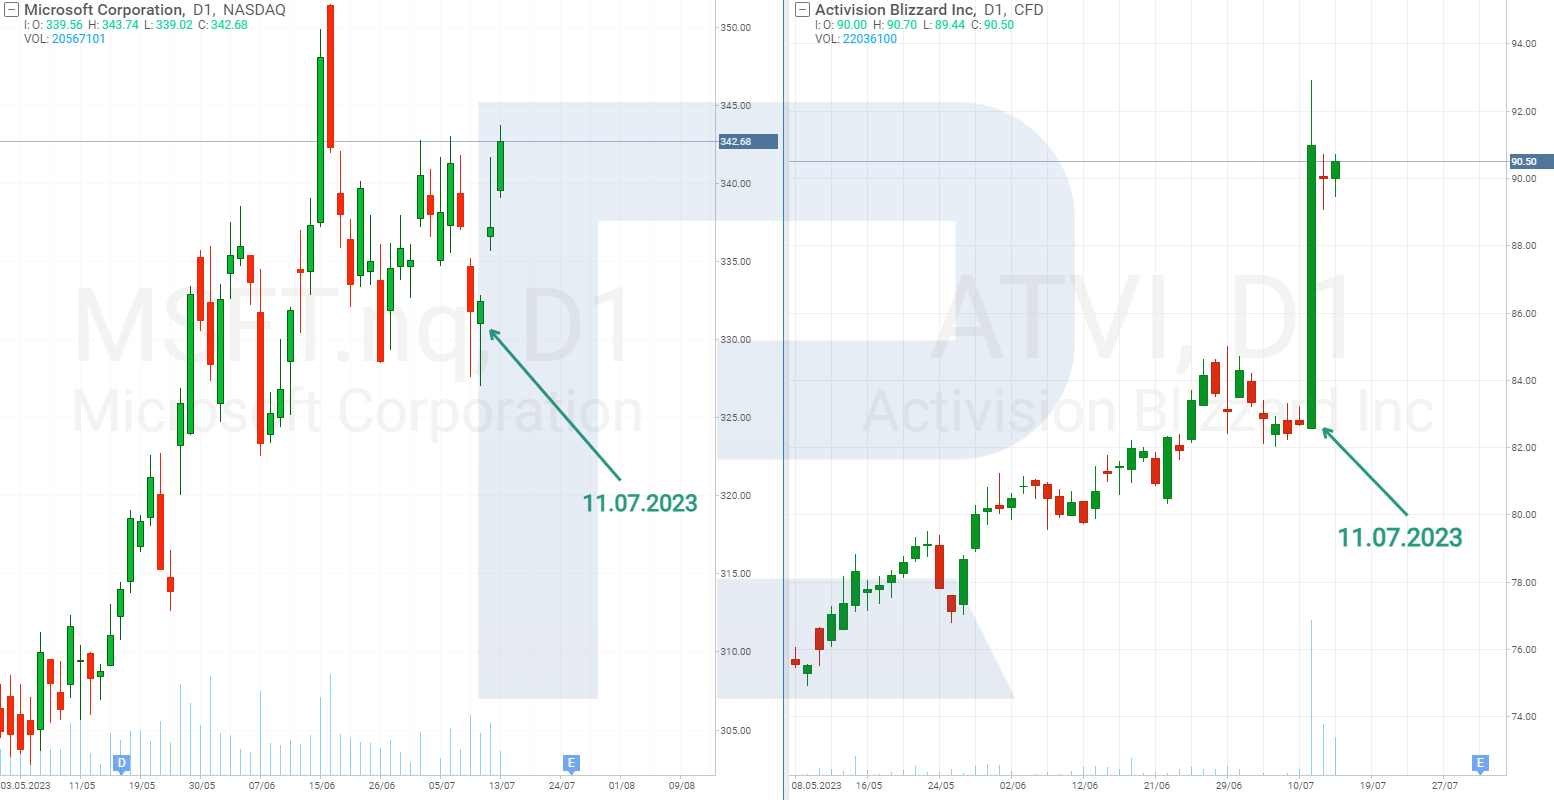 Stock charts of Microsoft Corporation and Activision Blizzard Inc.